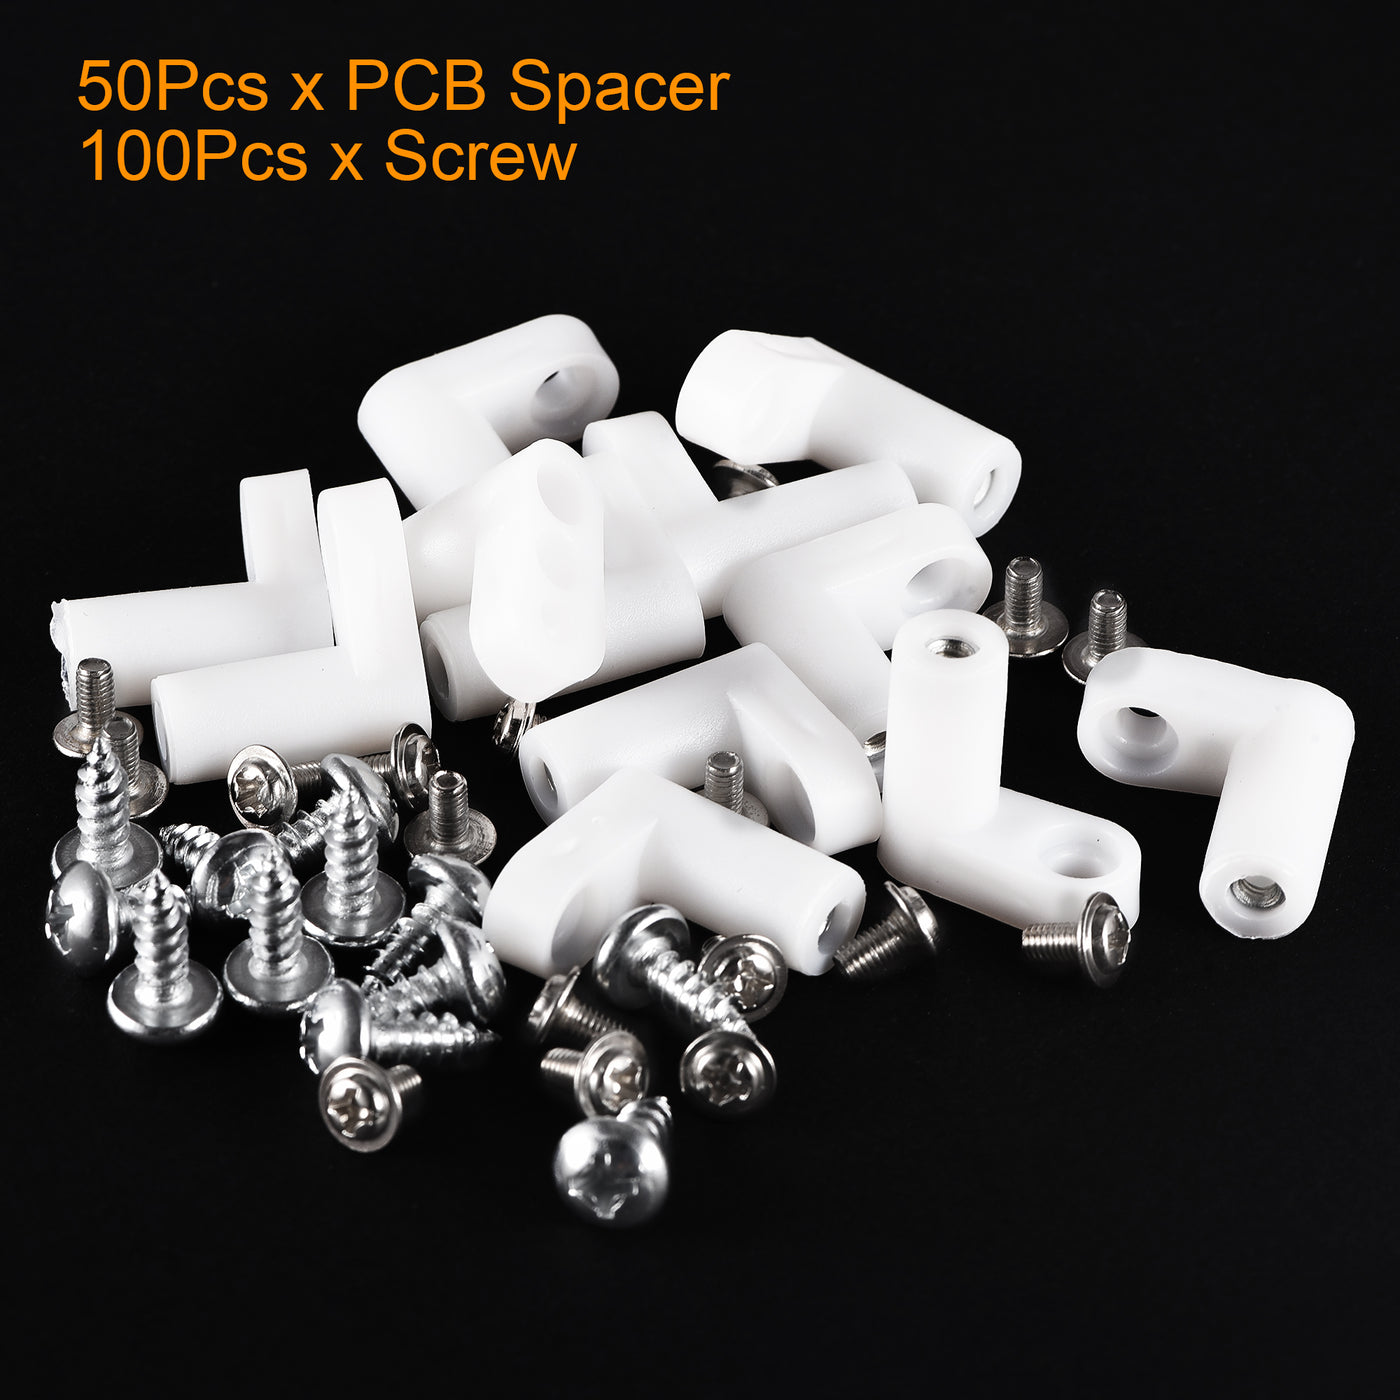 uxcell Uxcell 50Pcs Circuit Board PCB Spacers L Shape Insulated Plastic Fixed Mounting Feet 0.8'' Supporting Height with Screws